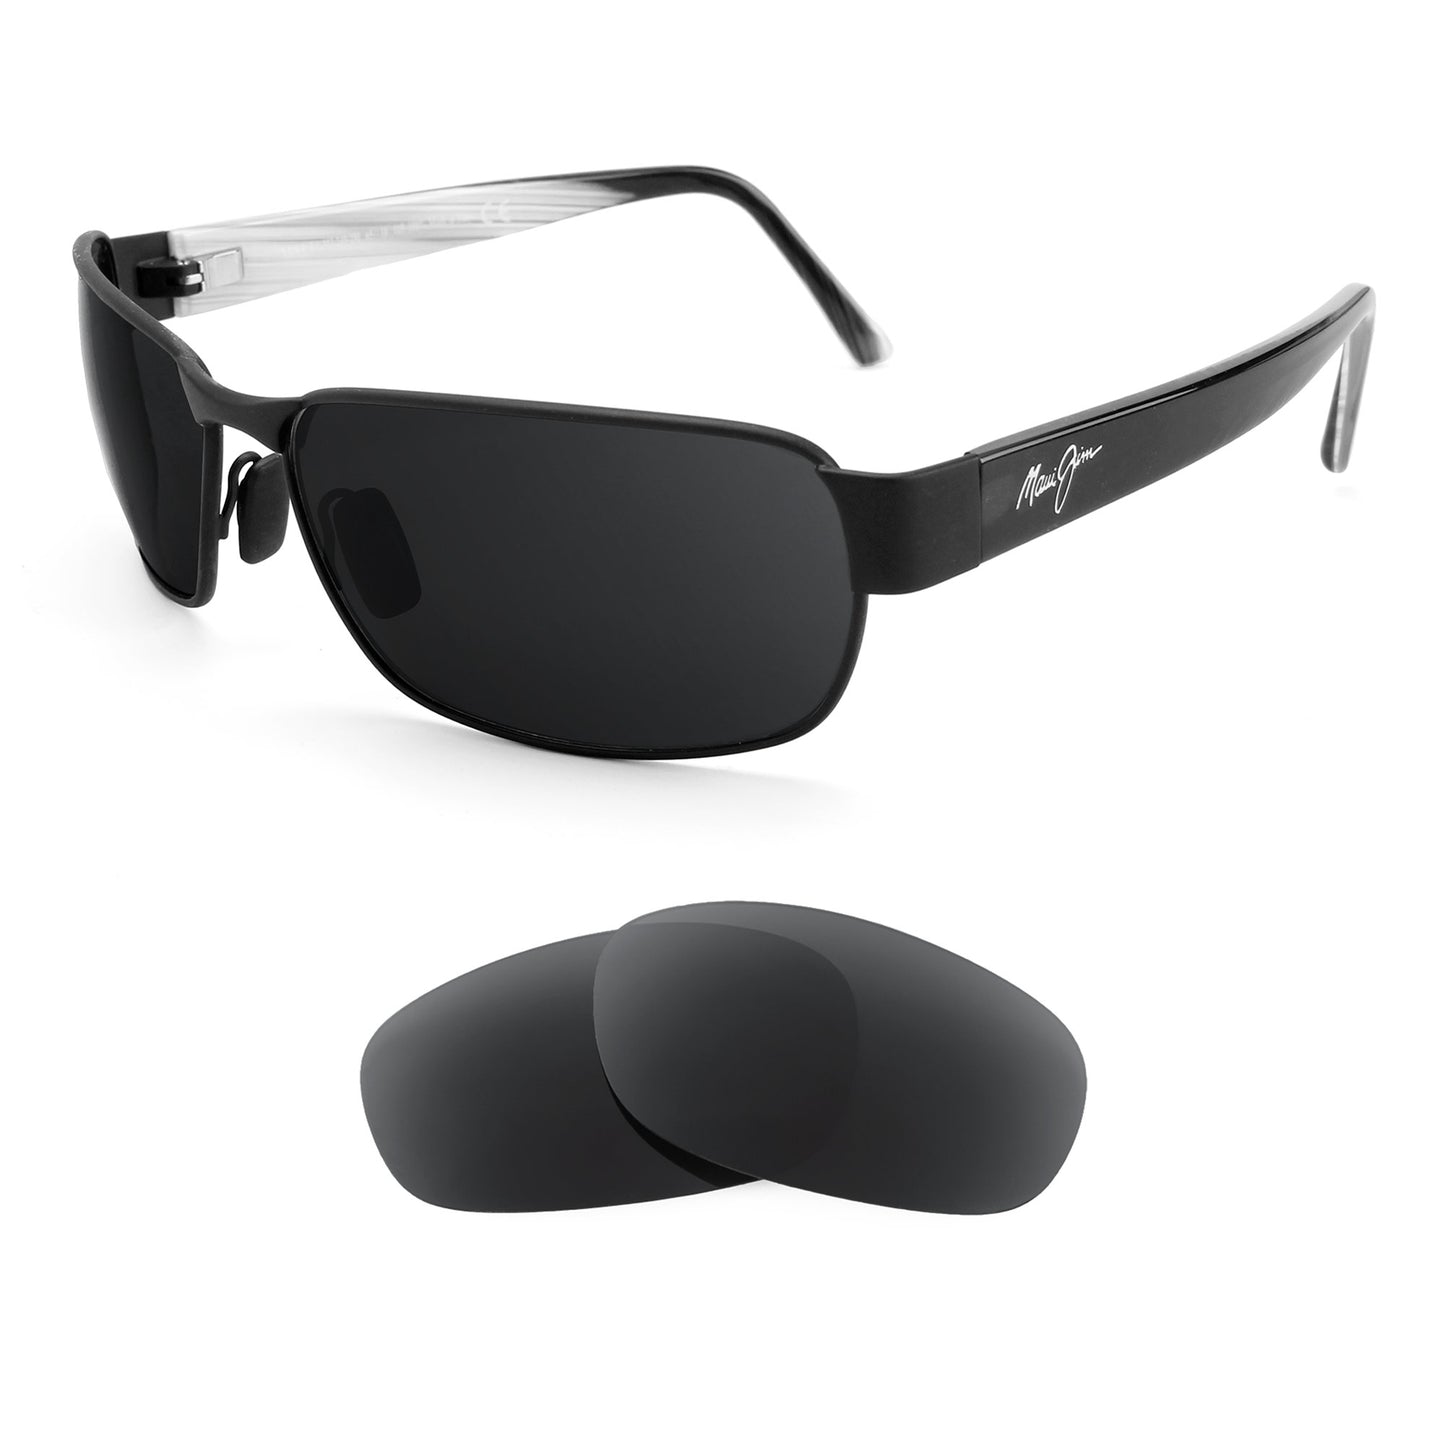 Maui Jim Black Coral MJ249 sunglasses with replacement lenses